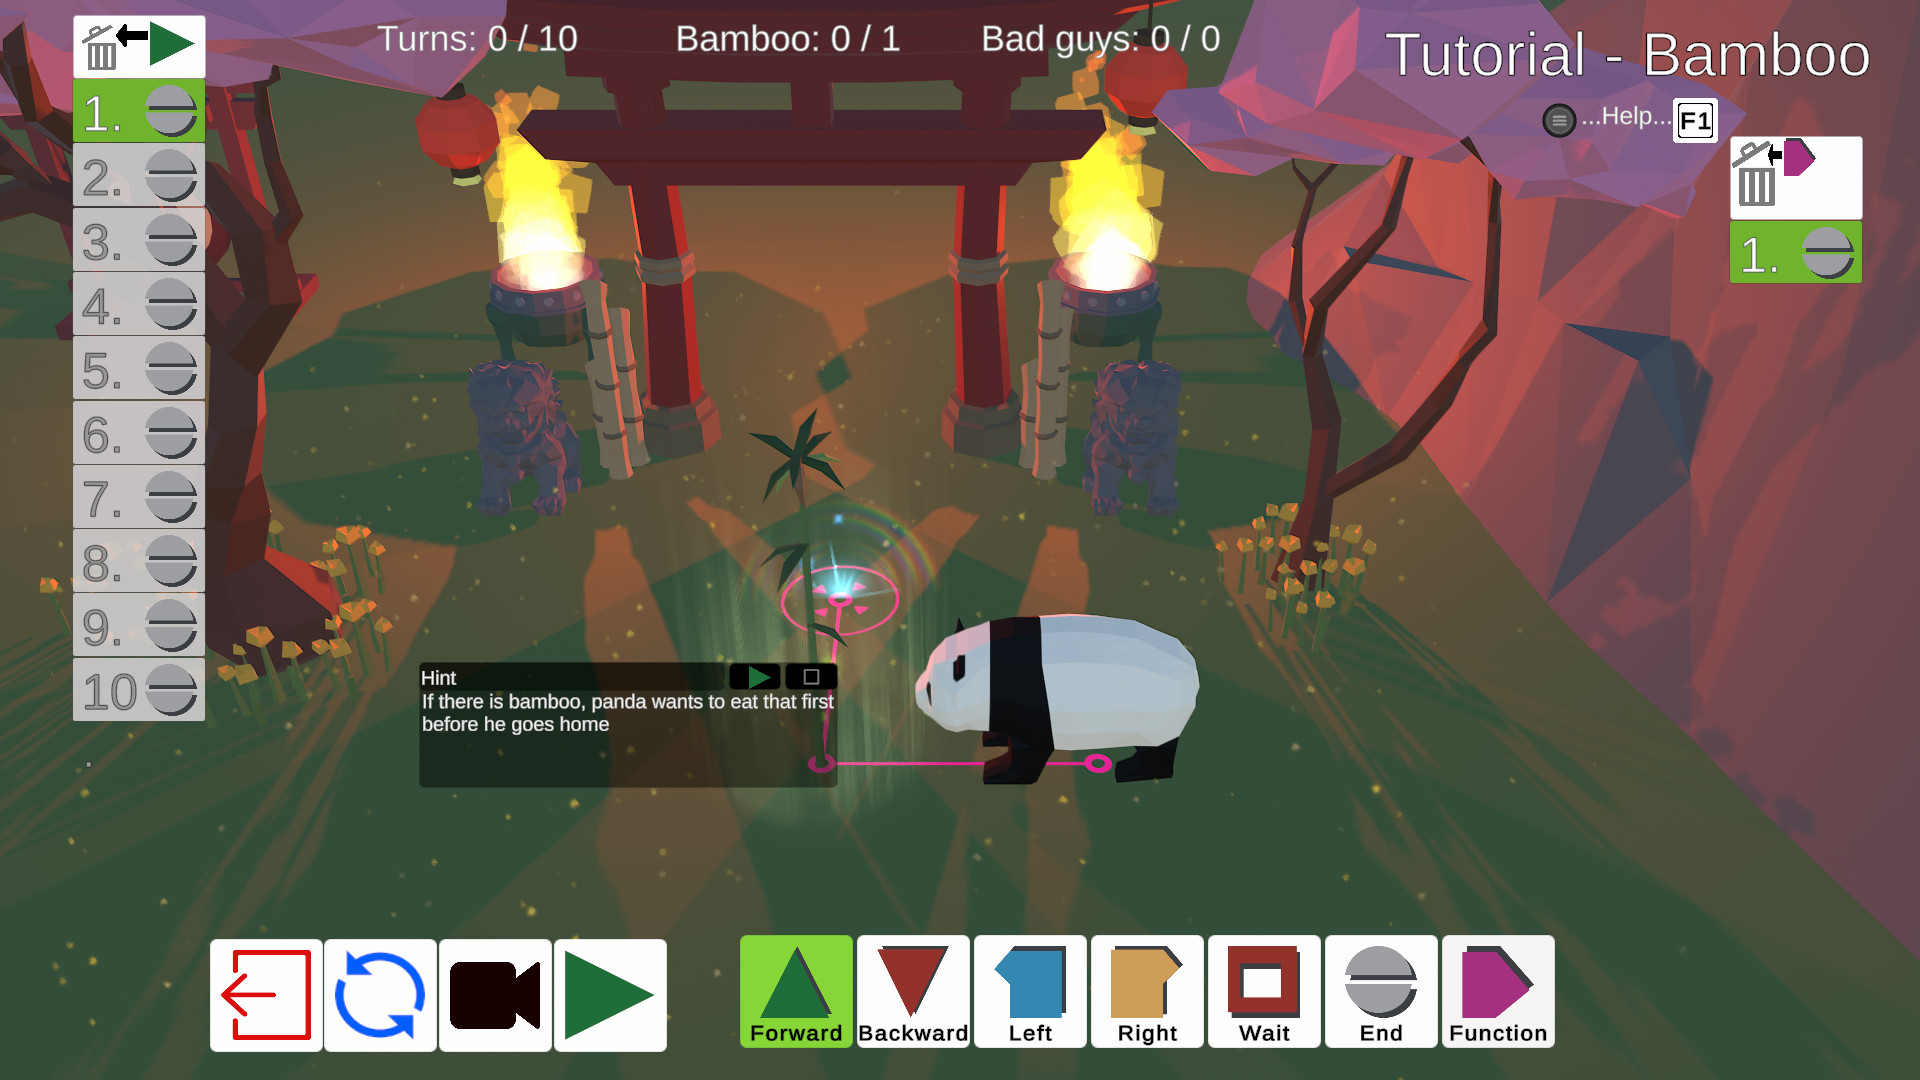 Screenshot of Bambo Forest